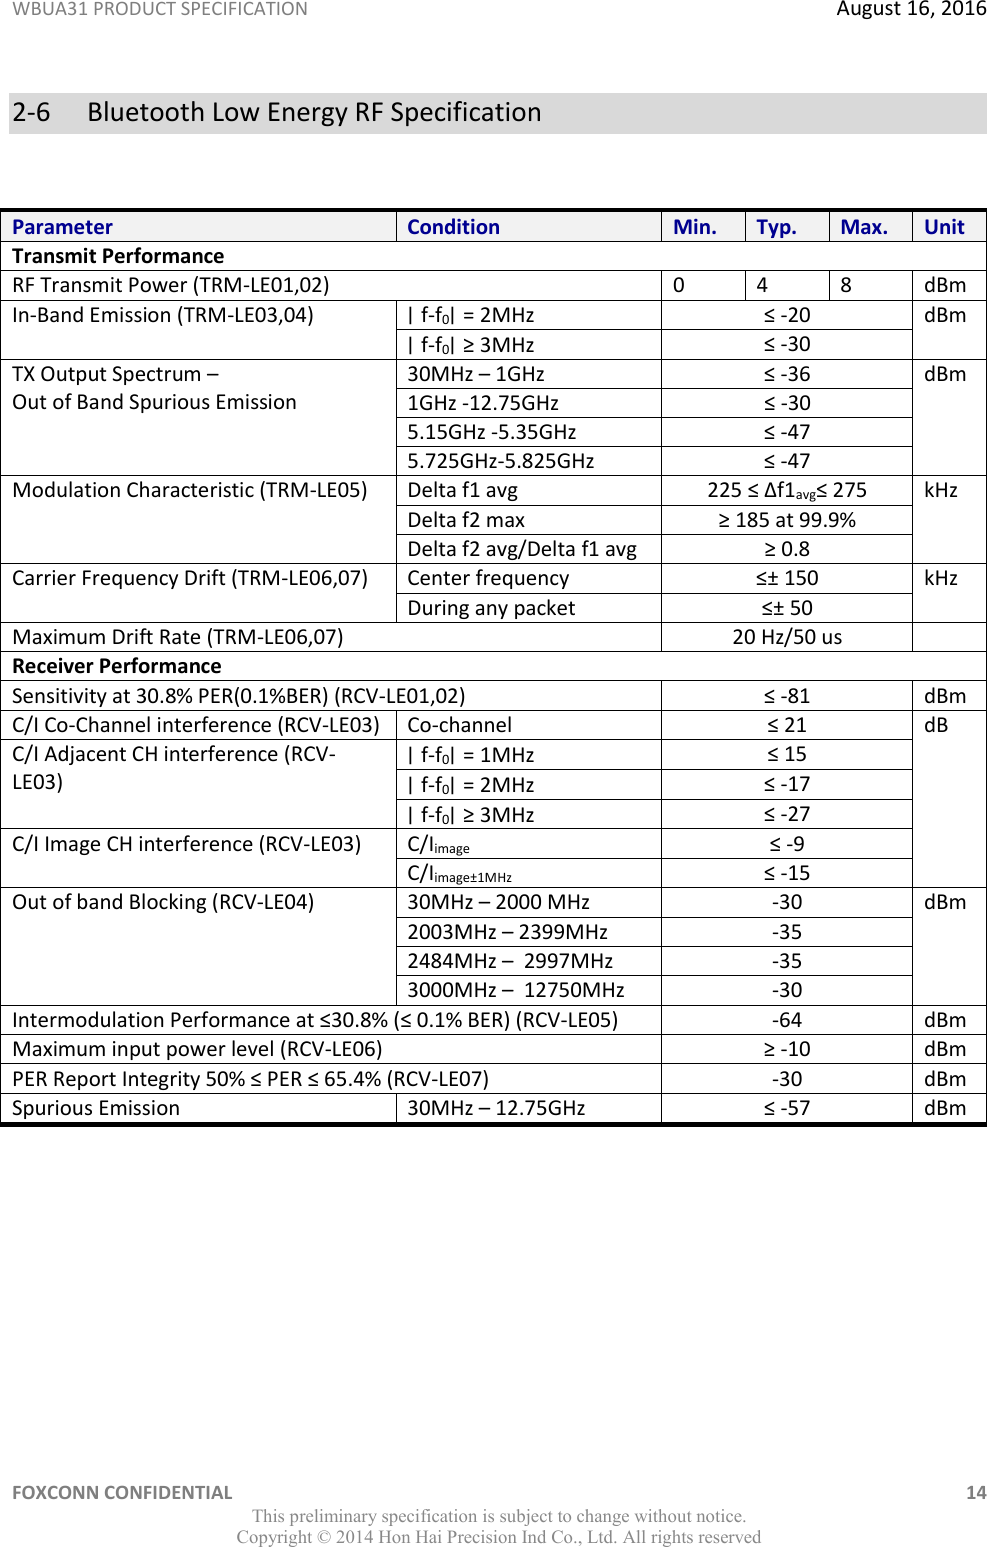 WBUA31 PRODUCT SPECIFICATION  August 16, 2016 FOXCONN CONFIDENTIAL    14 This preliminary specification is subject to change without notice. Copyright ©  2014 Hon Hai Precision Ind Co., Ltd. All rights reserved 2-6  Bluetooth Low Energy RF Specification  Parameter Condition Min. Typ. Max. Unit Transmit Performance RF Transmit Power (TRM-LE01,02) 0 4 8 dBm In-Band Emission (TRM-LE03,04) ∣f-f0∣= 2MHz ≤ -20 dBm ∣f-f0∣≥ 3MHz ≤ -30 TX Output Spectrum –  Out of Band Spurious Emission 30MHz – 1GHz ≤ -36 dBm 1GHz -12.75GHz    ≤ -30 5.15GHz -5.35GHz ≤ -47 5.725GHz-5.825GHz ≤ -47 Modulation Characteristic (TRM-LE05) Delta f1 avg 225 ≤ ∆f1avg≤ 275 kHz Delta f2 max ≥ 185 at 99.9% Delta f2 avg/Delta f1 avg     ≥ 0.8 Carrier Frequency Drift (TRM-LE06,07) Center frequency ≤± 150 kHz During any packet ≤± 50 Maximum Drift Rate (TRM-LE06,07) 20 Hz/50 us  Receiver Performance Sensitivity at 30.8% PER(0.1%BER) (RCV-LE01,02) ≤ -81 dBm C/I Co-Channel interference (RCV-LE03) Co-channel ≤ 21 dB C/I Adjacent CH interference (RCV-LE03) ∣f-f0∣= 1MHz ≤ 15 ∣f-f0∣= 2MHz ≤ -17 ∣f-f0∣≥ 3MHz ≤ -27 C/I Image CH interference (RCV-LE03) C/Iimage ≤ -9 C/Iimage±1MHz ≤ -15 Out of band Blocking (RCV-LE04) 30MHz – 2000 MHz -30 dBm 2003MHz – 2399MHz -35 2484MHz –  2997MHz -35 3000MHz –  12750MHz -30 Intermodulation Performance at ≤30.8% (≤ 0.1% BER) (RCV-LE05) -64 dBm Maximum input power level (RCV-LE06) ≥ -10 dBm PER Report Integrity 50% ≤ PER ≤ 65.4% (RCV-LE07) -30 dBm Spurious Emission 30MHz – 12.75GHz ≤ -57 dBm       